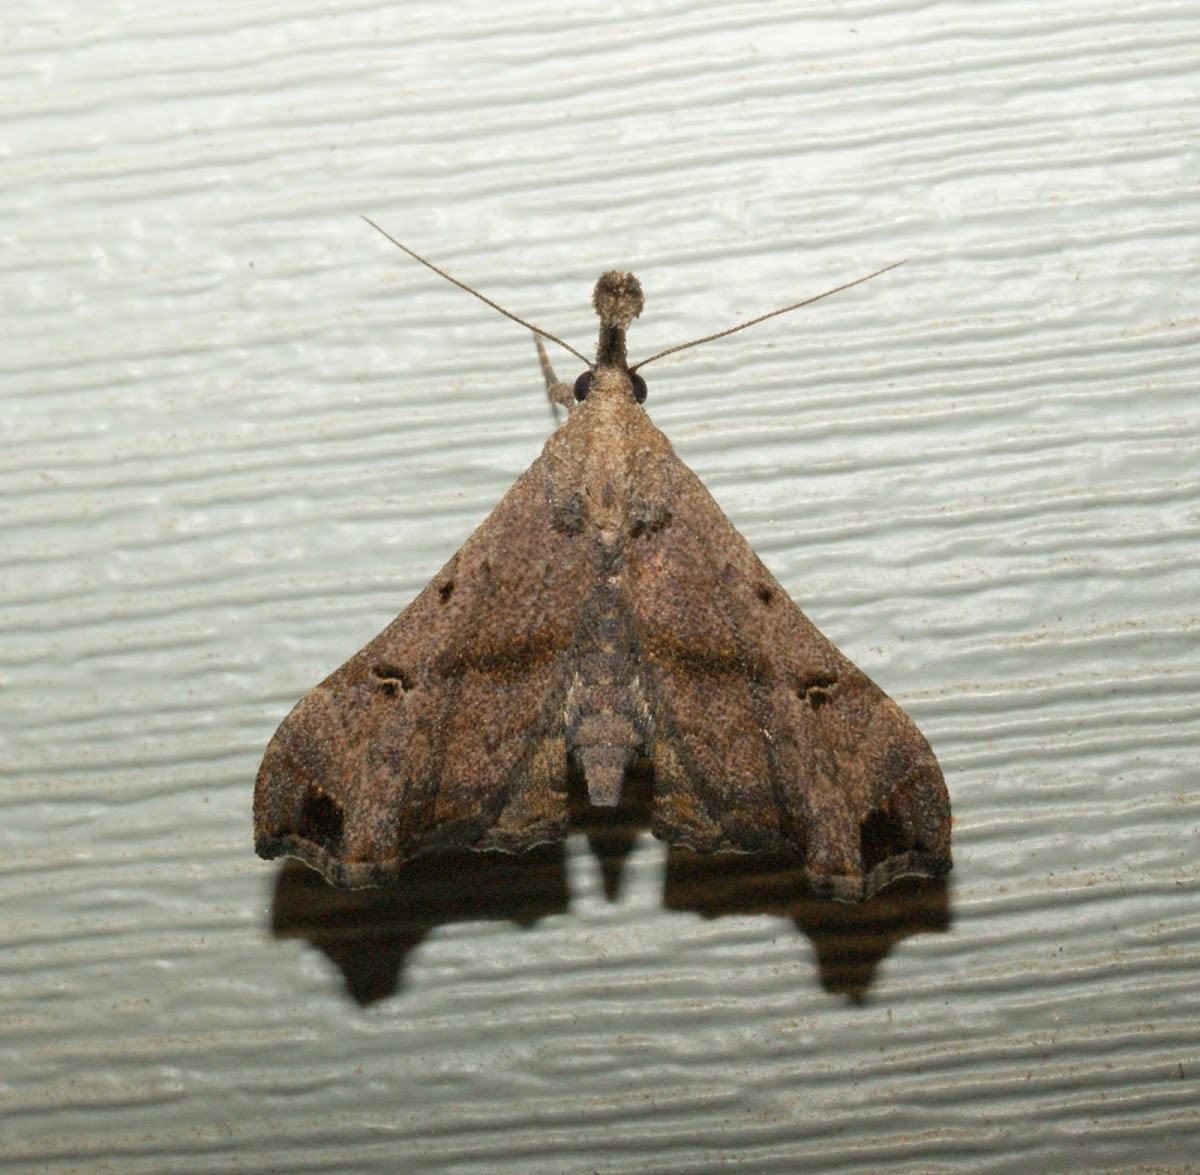 Faint-spotted Palthis